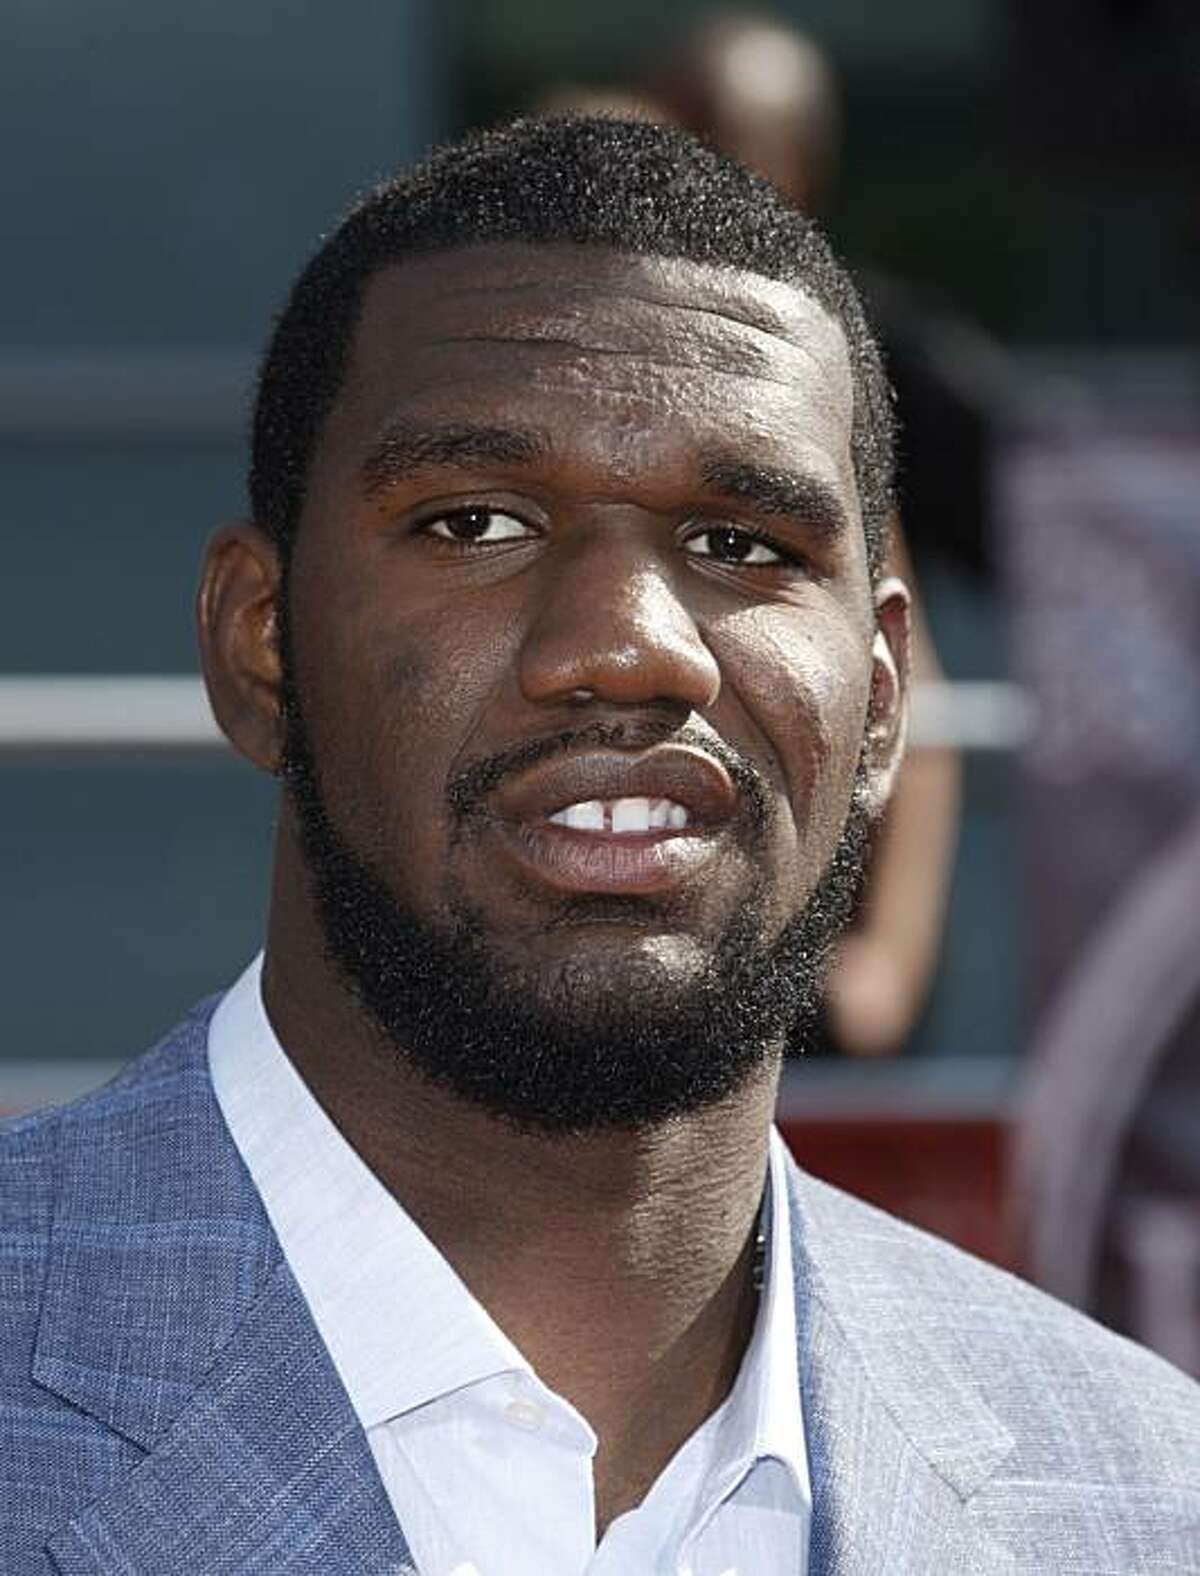 NBA player Greg Oden arrives at the ESPYs Awards on Wednesday July 16, 2008 in Los Angeles. (AP Photo/Matt Sayles)